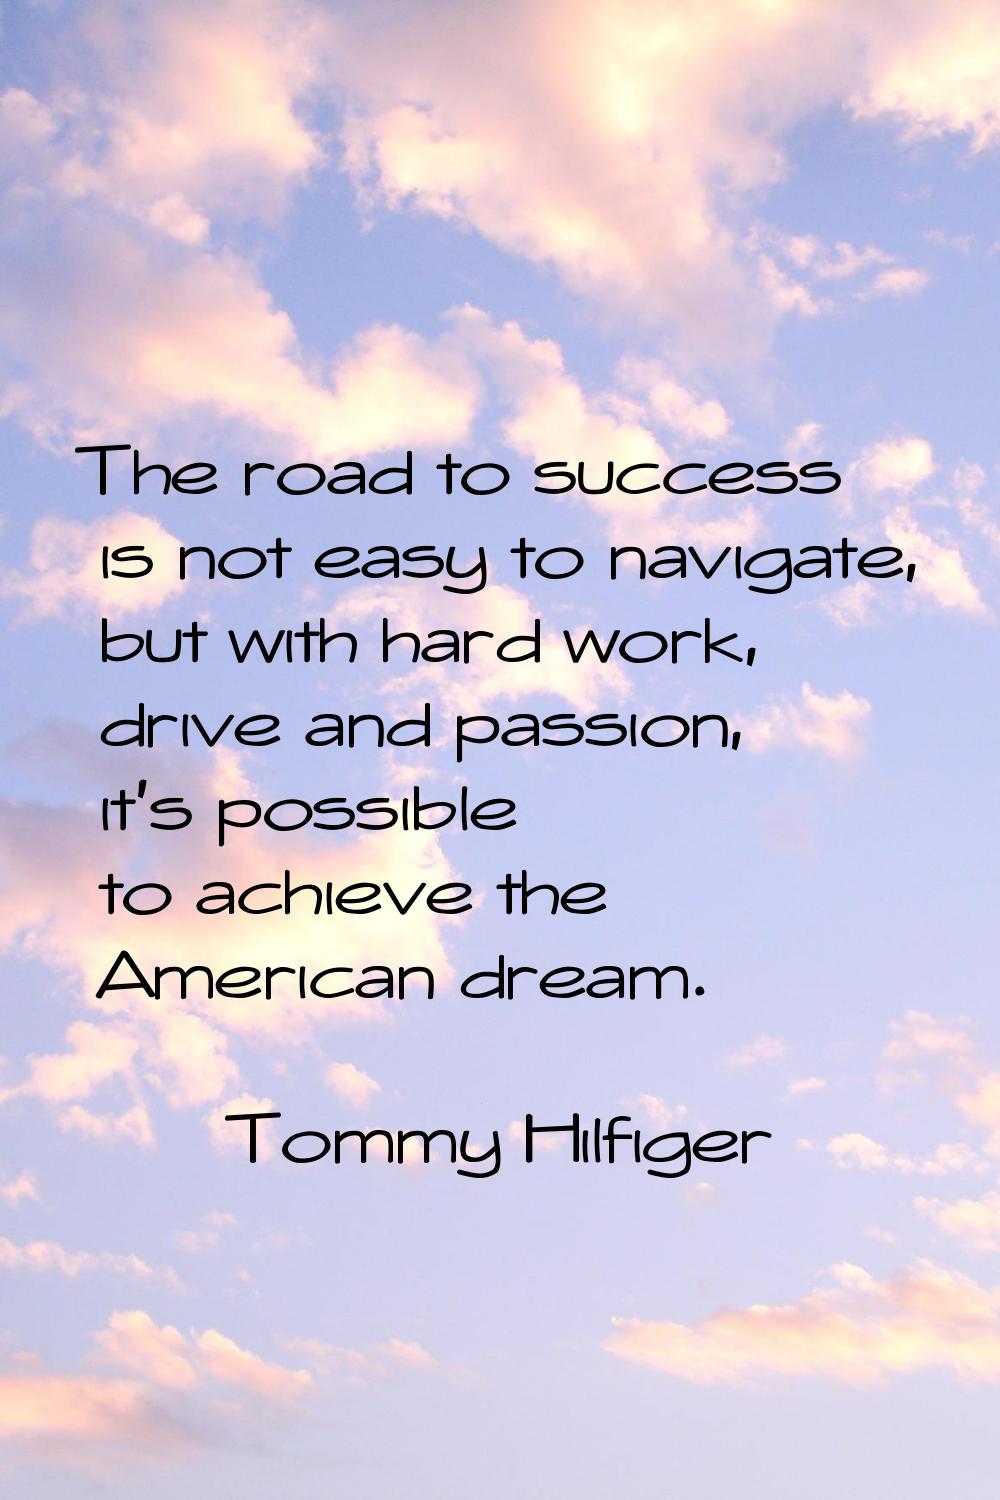 The road to success is not easy to navigate, but with hard work, drive and passion, it's possible t